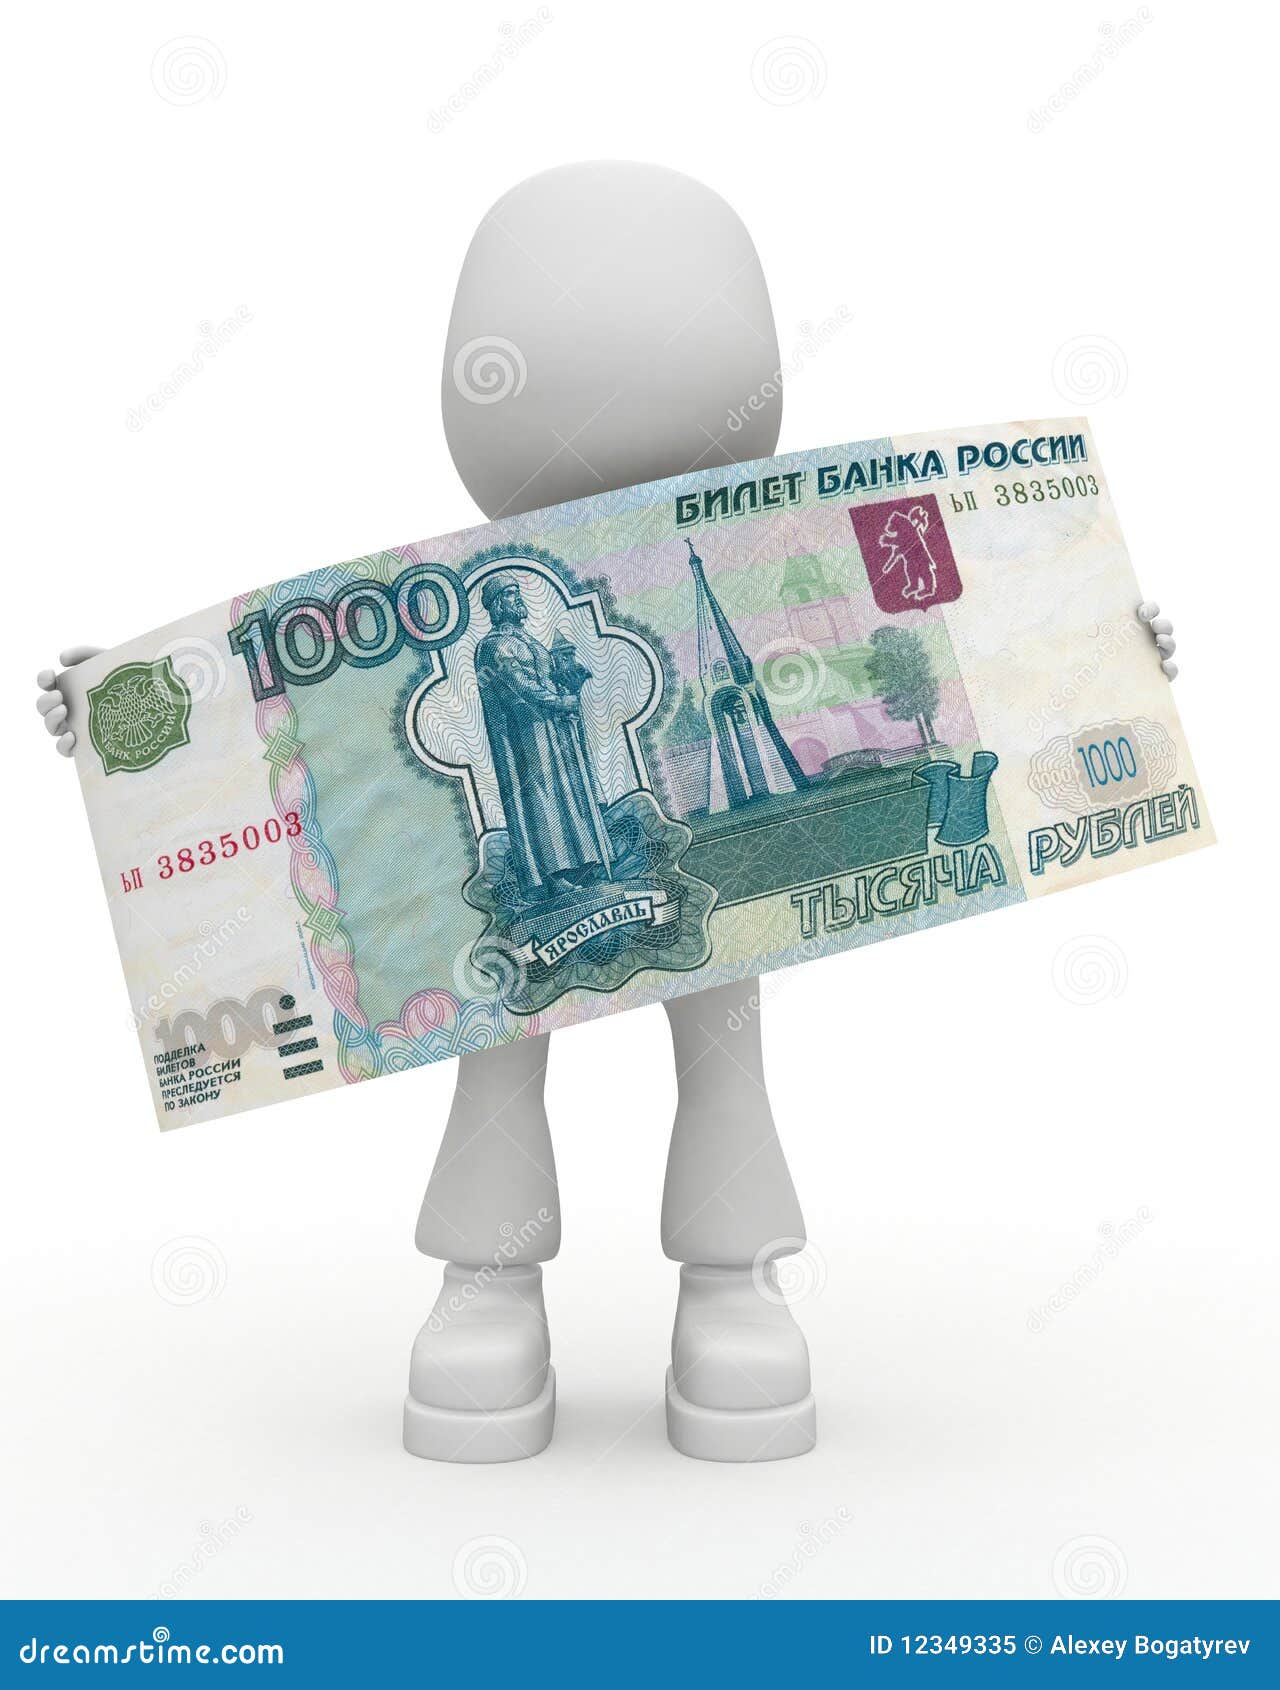 rouble -one thousand roubles